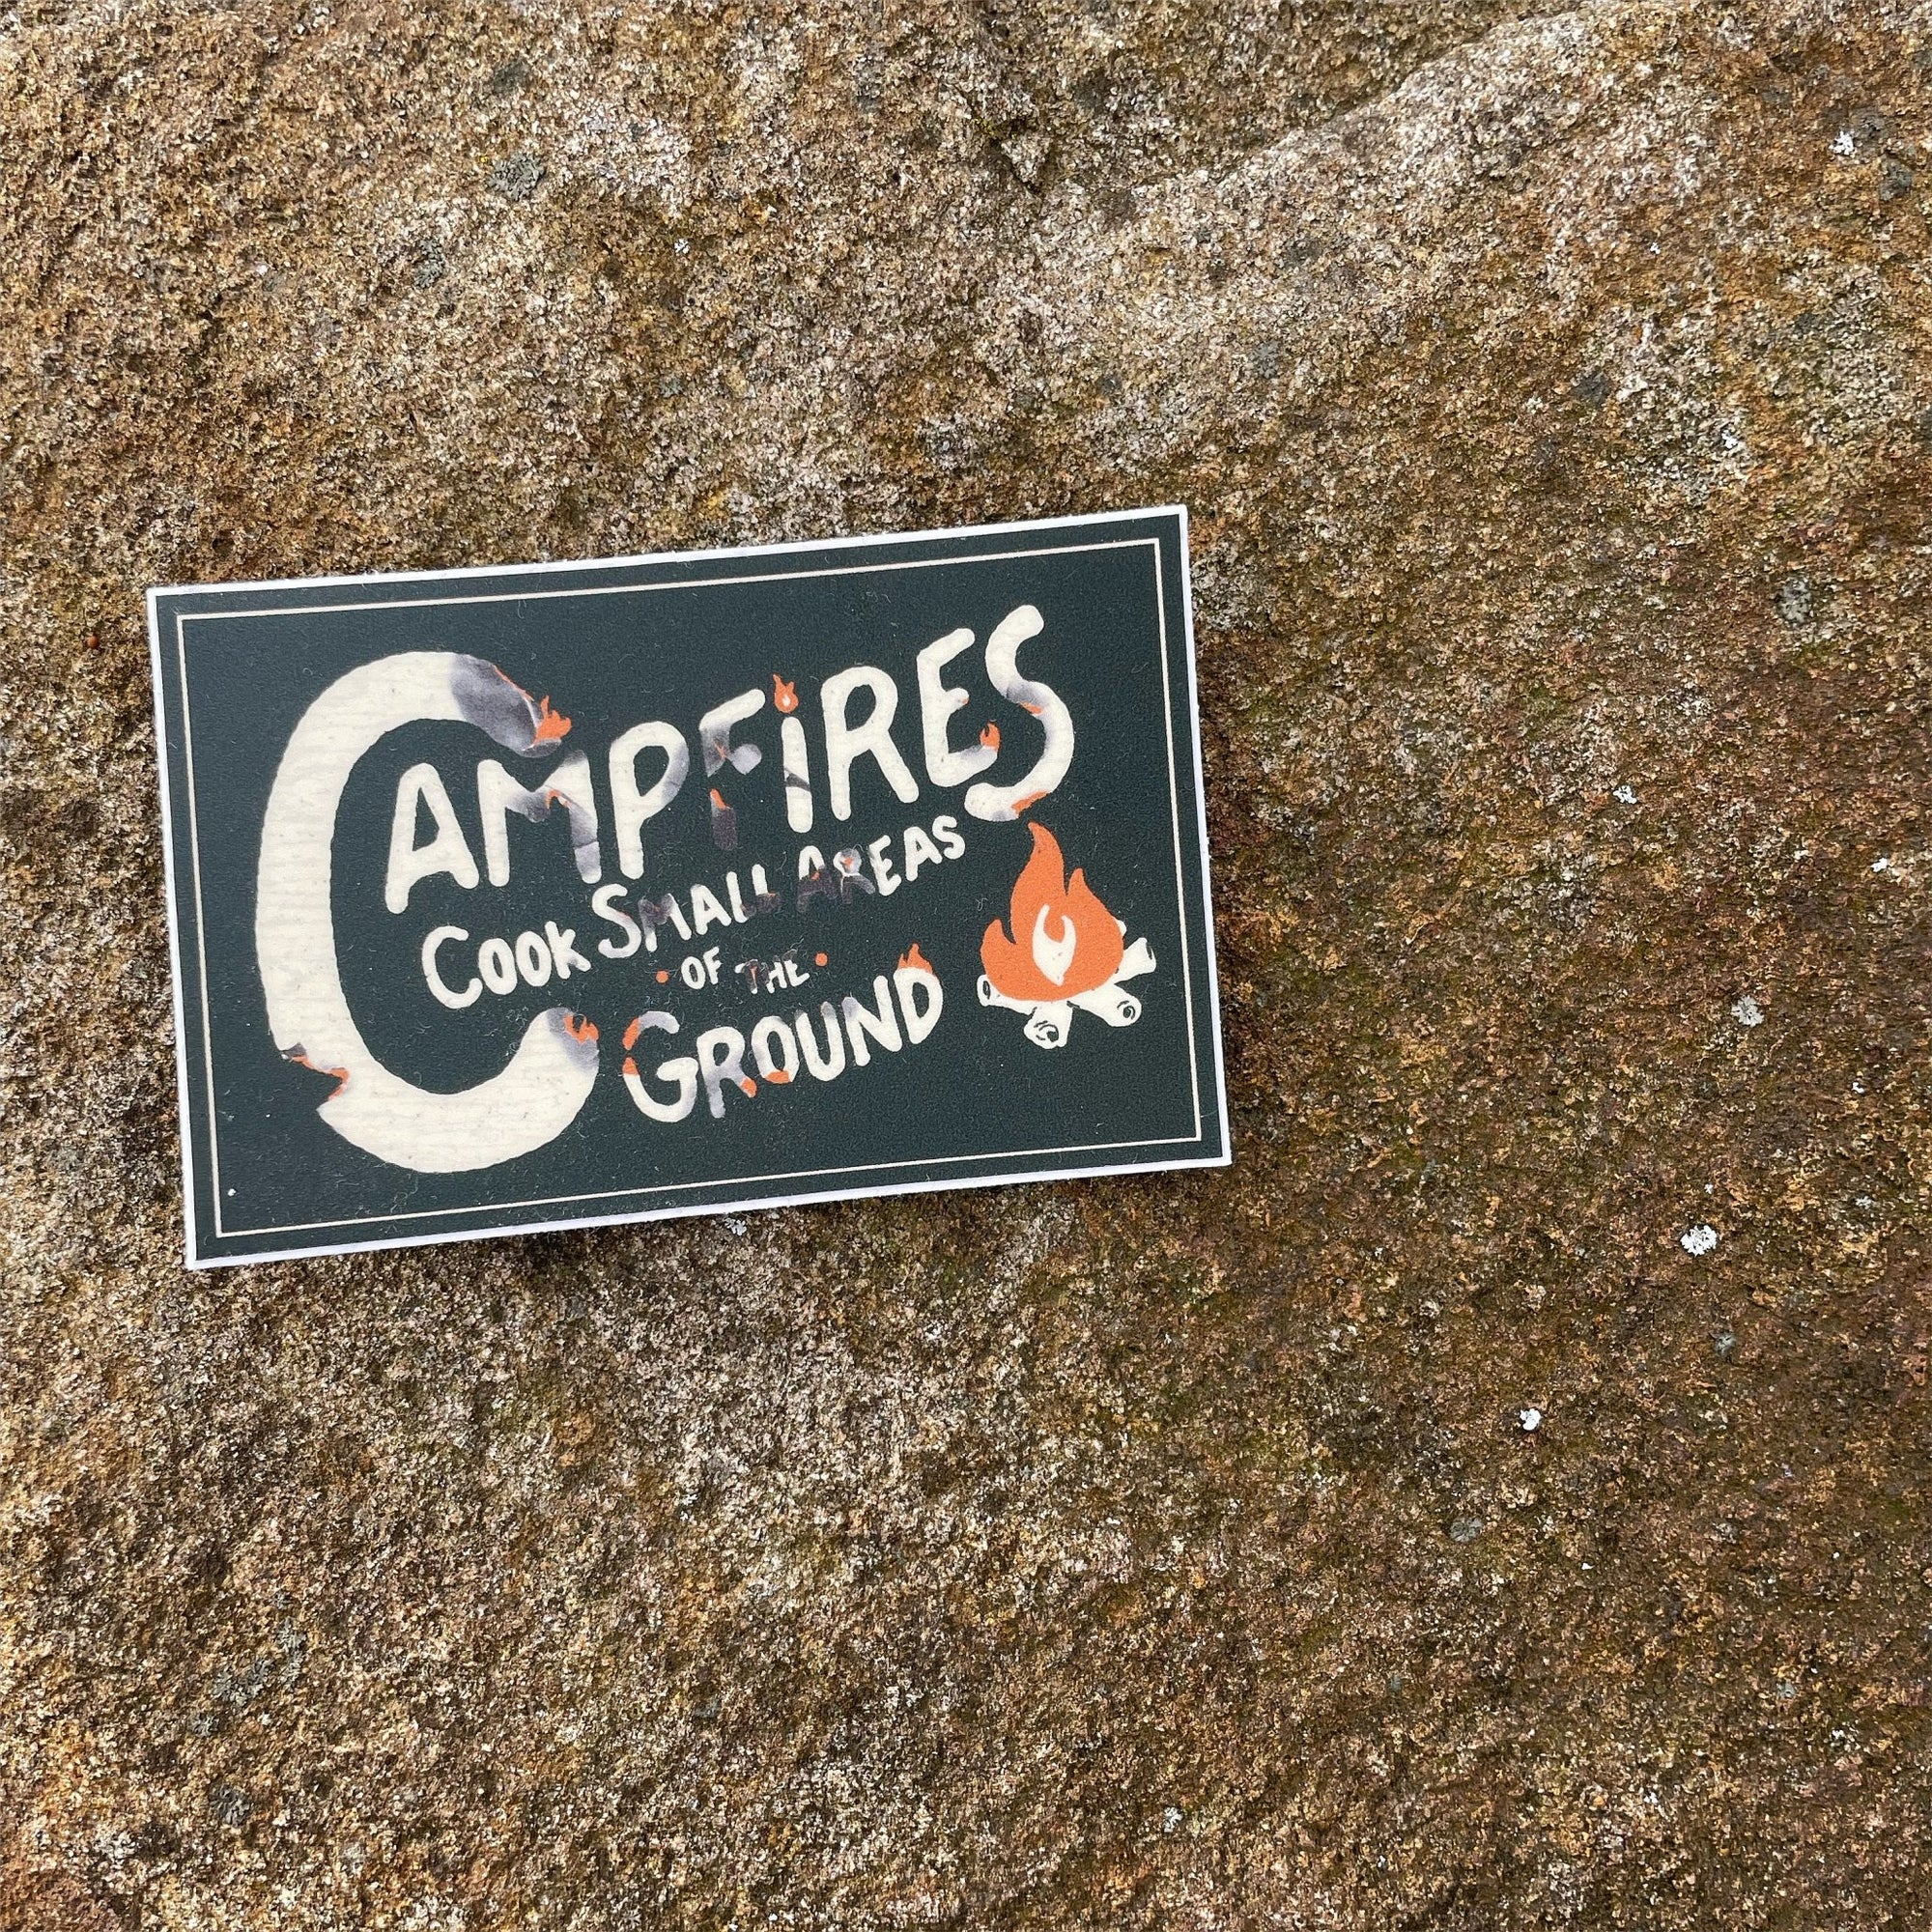 Campfires Cook Small Areas of the Ground - menottees